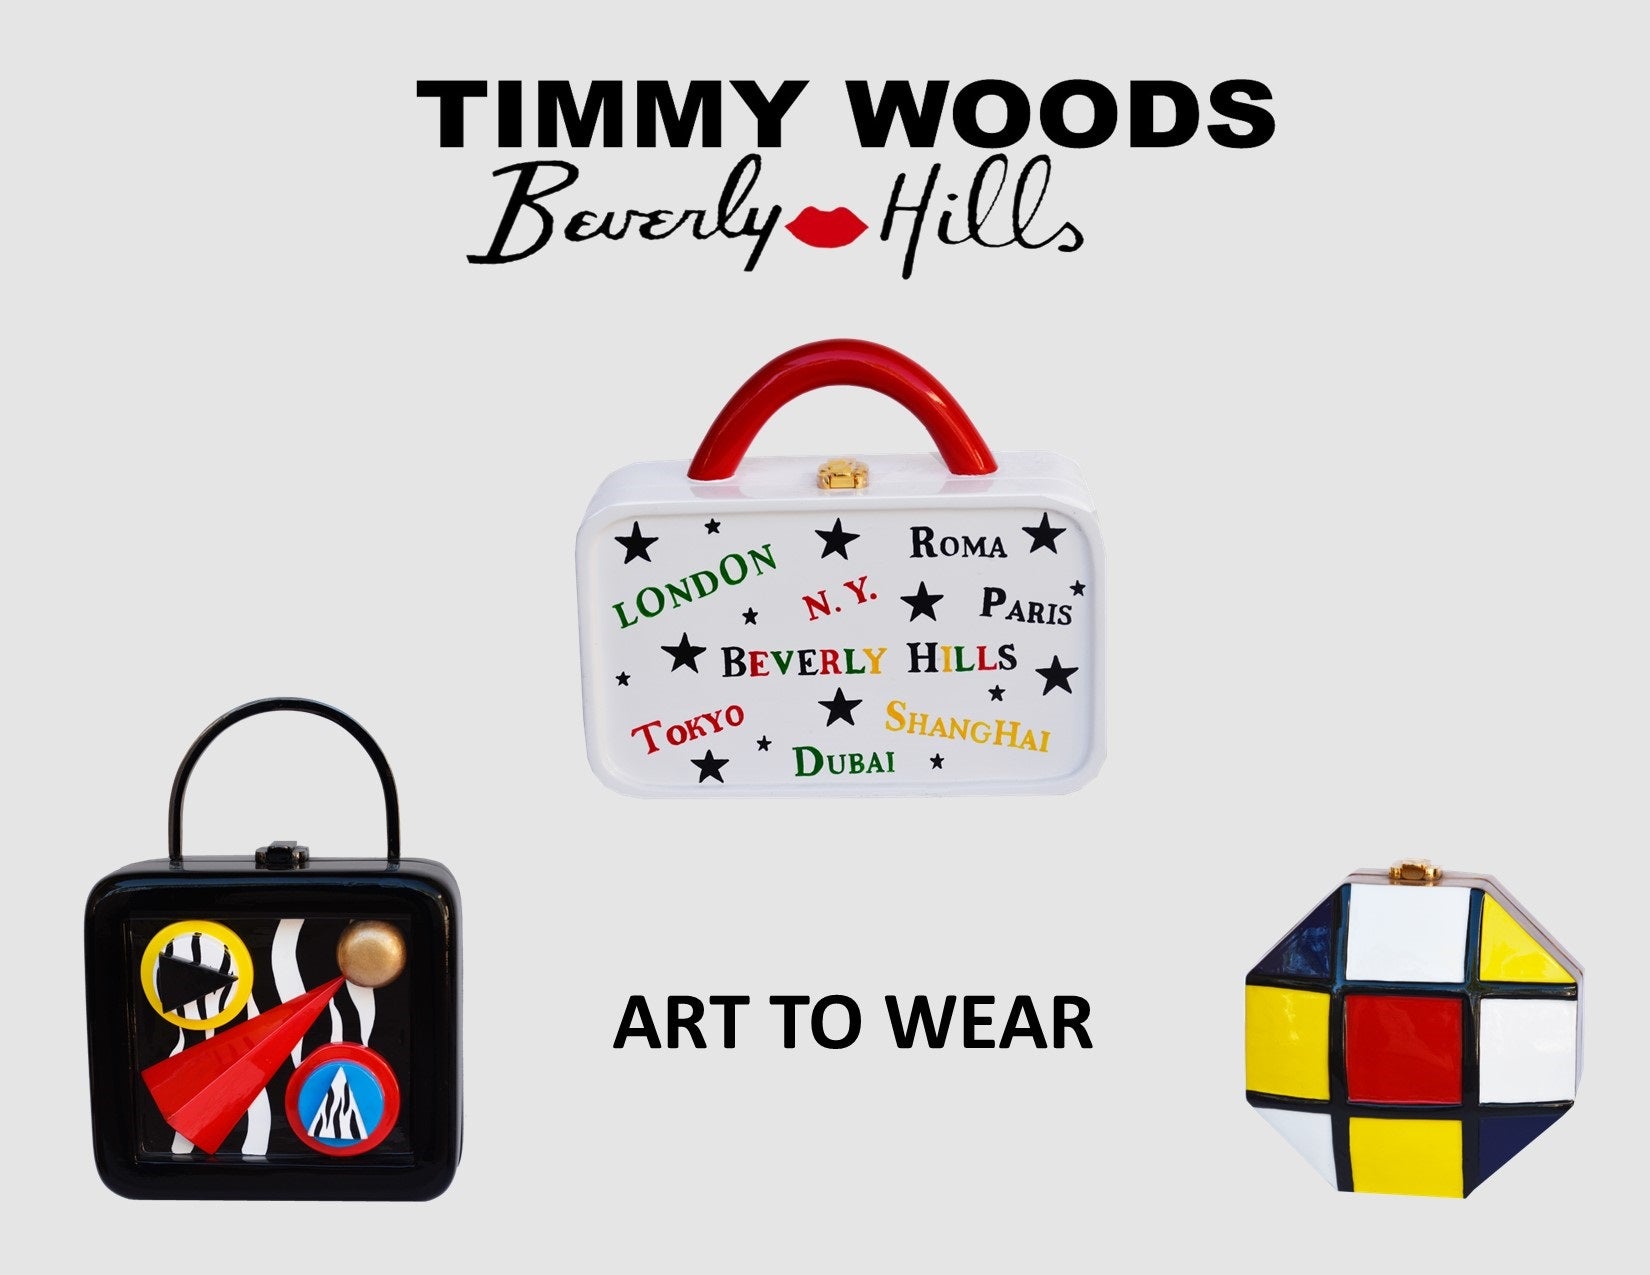 Timmy Woods